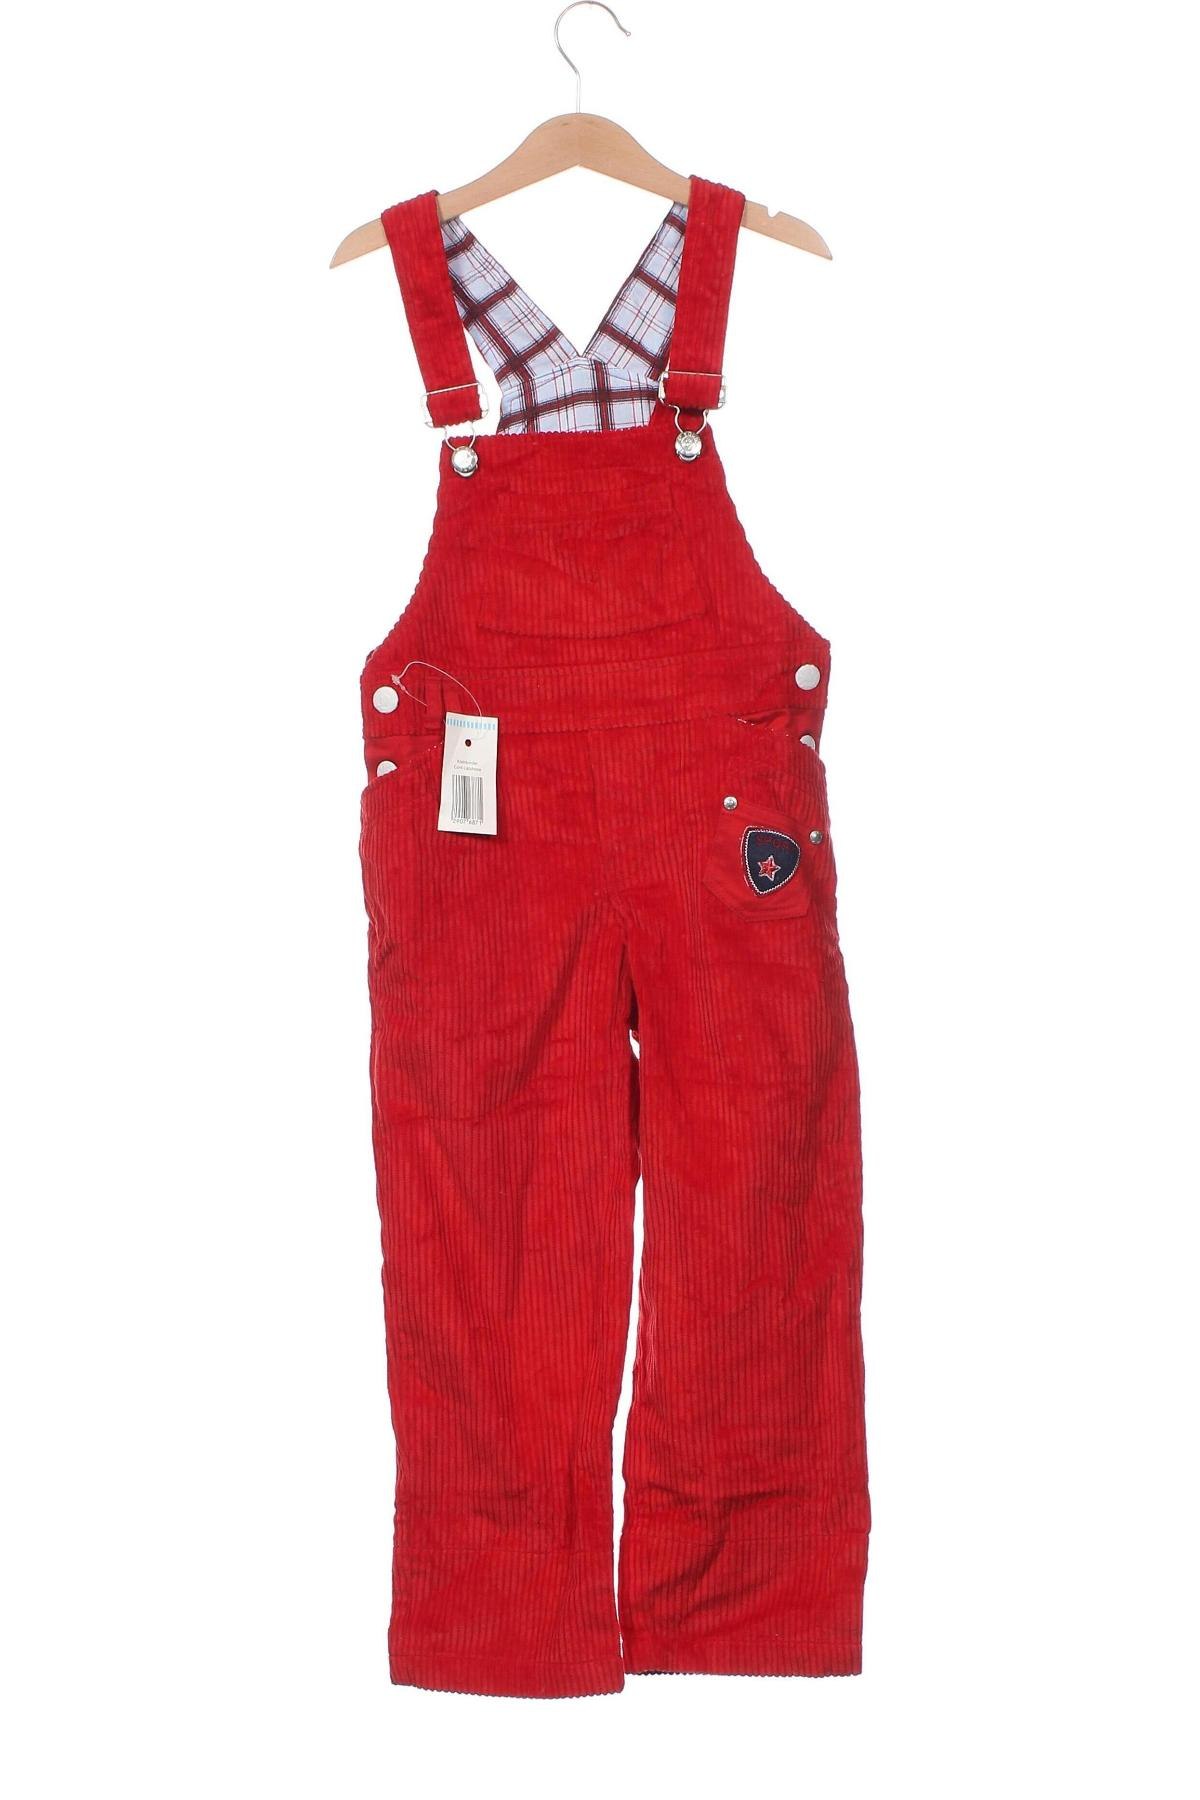 Kinder Overall Papagino, Größe 3-4y/ 104-110 cm, Farbe Rot, Preis € 11,14